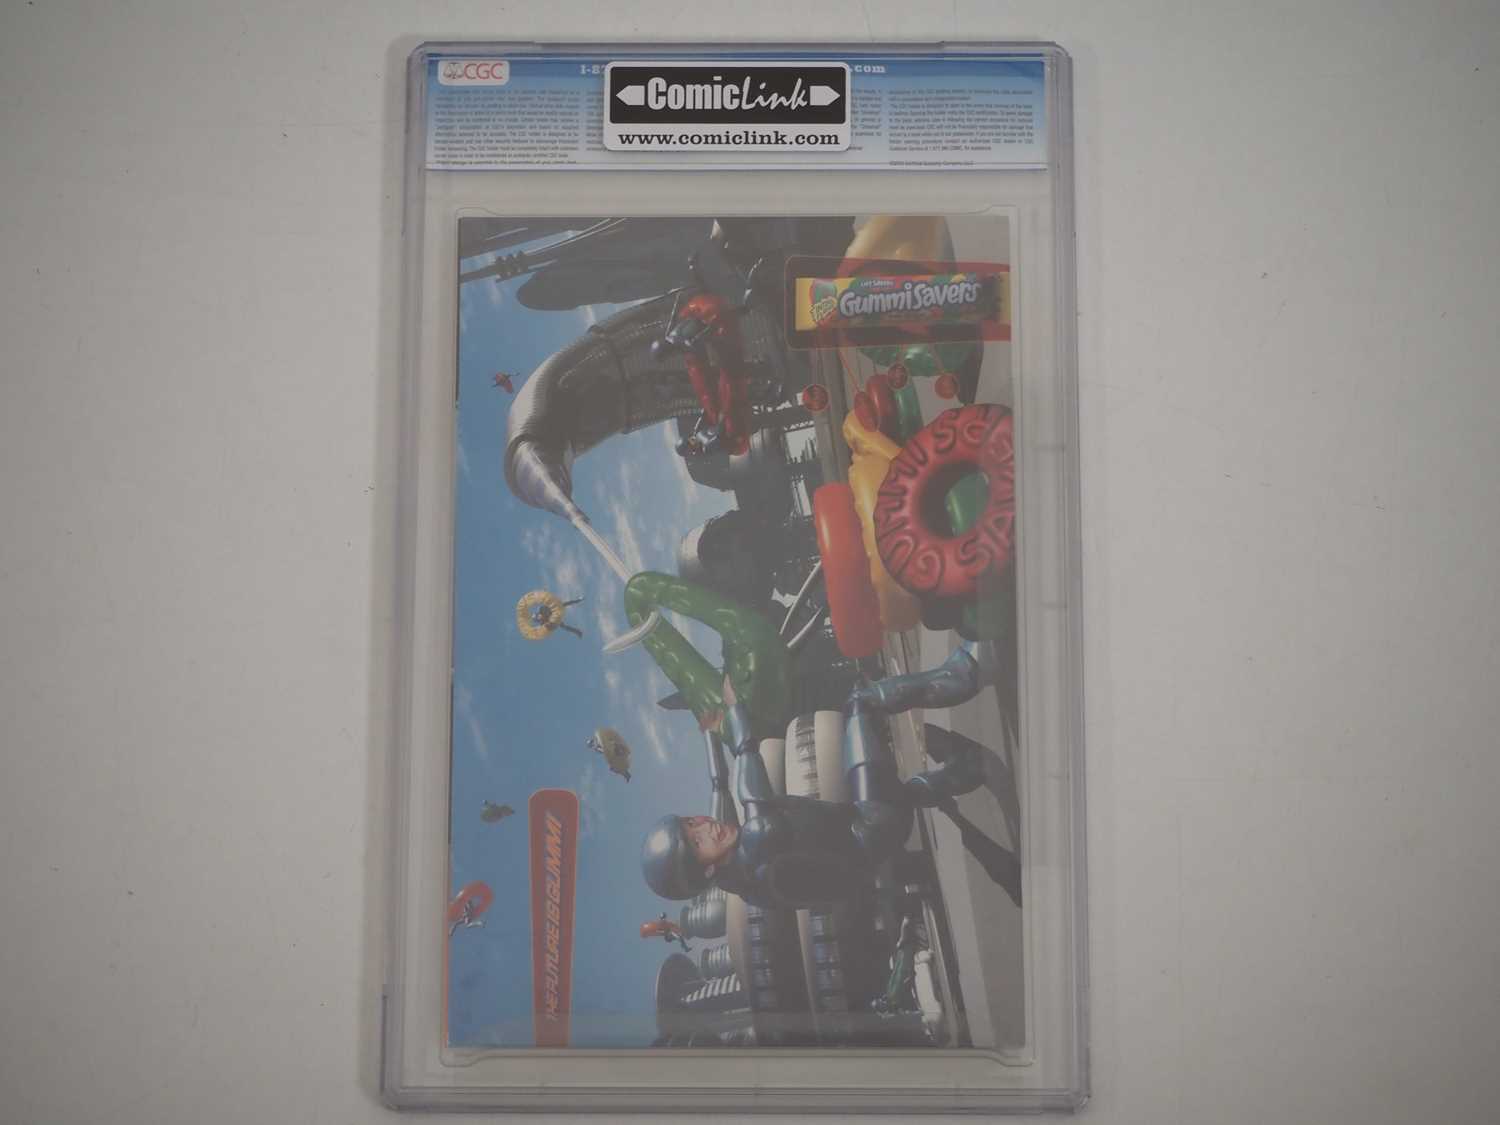 ULTIMATE SPIDER-MAN #1 VARIANT COVER (2000 - MARVEL) - GRADED 9.8(NM/MINT) by CGC - Includes the - Image 2 of 4